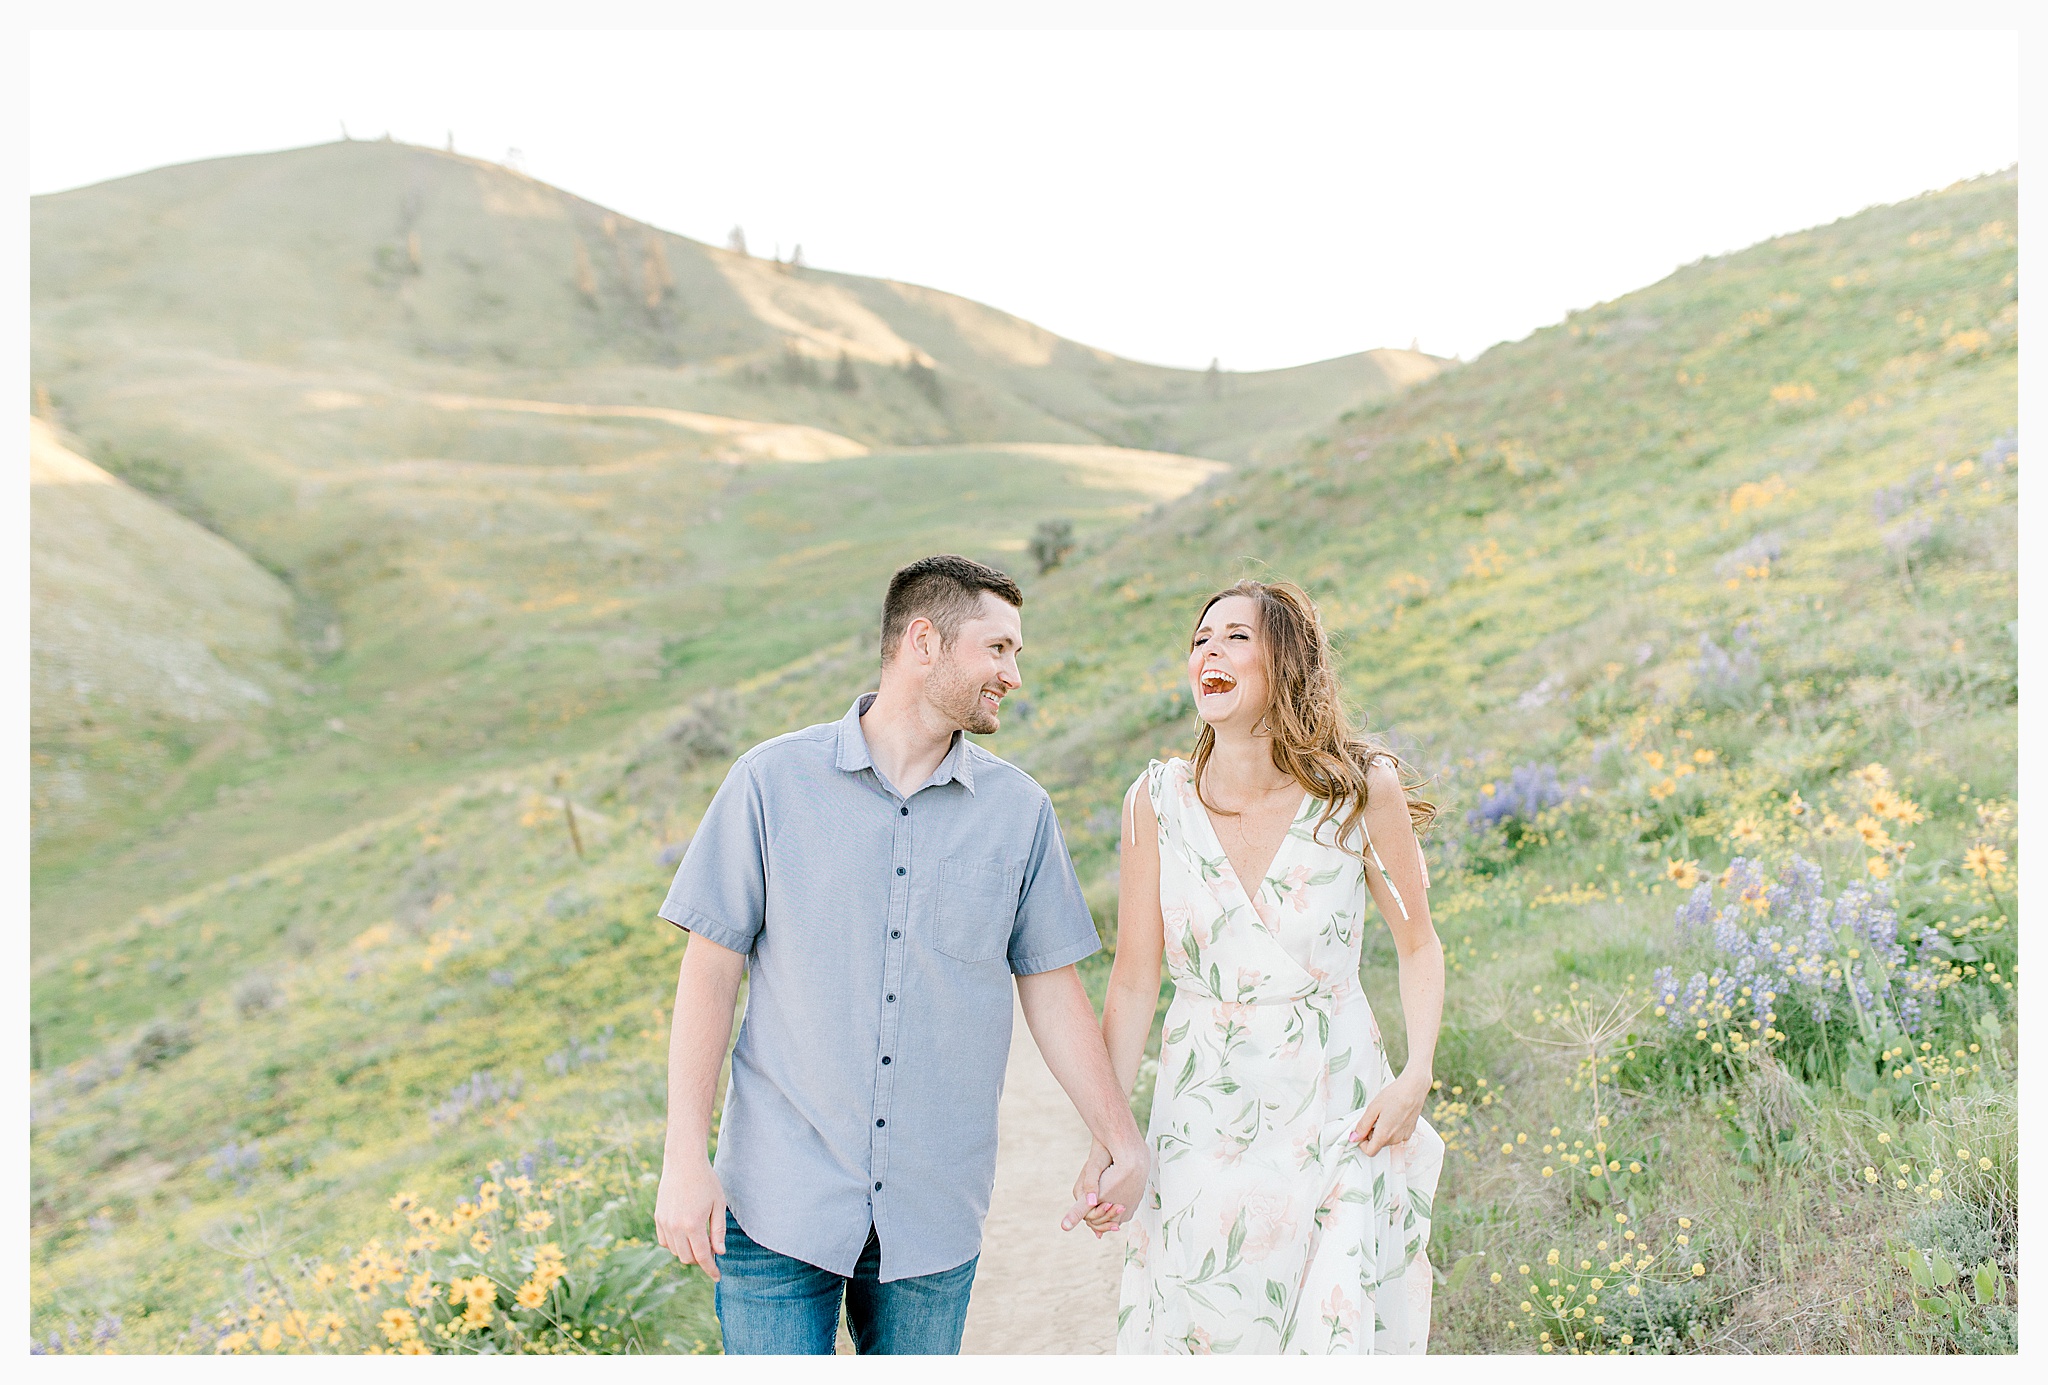 Engagement session amongst the wildflowers in Wenatchee, Washington | Engagement Session Outfit Inspiration for Wedding Photography with Emma Rose Company | Light and Airy PNW Photographer, Seattle Bride_0012.jpg